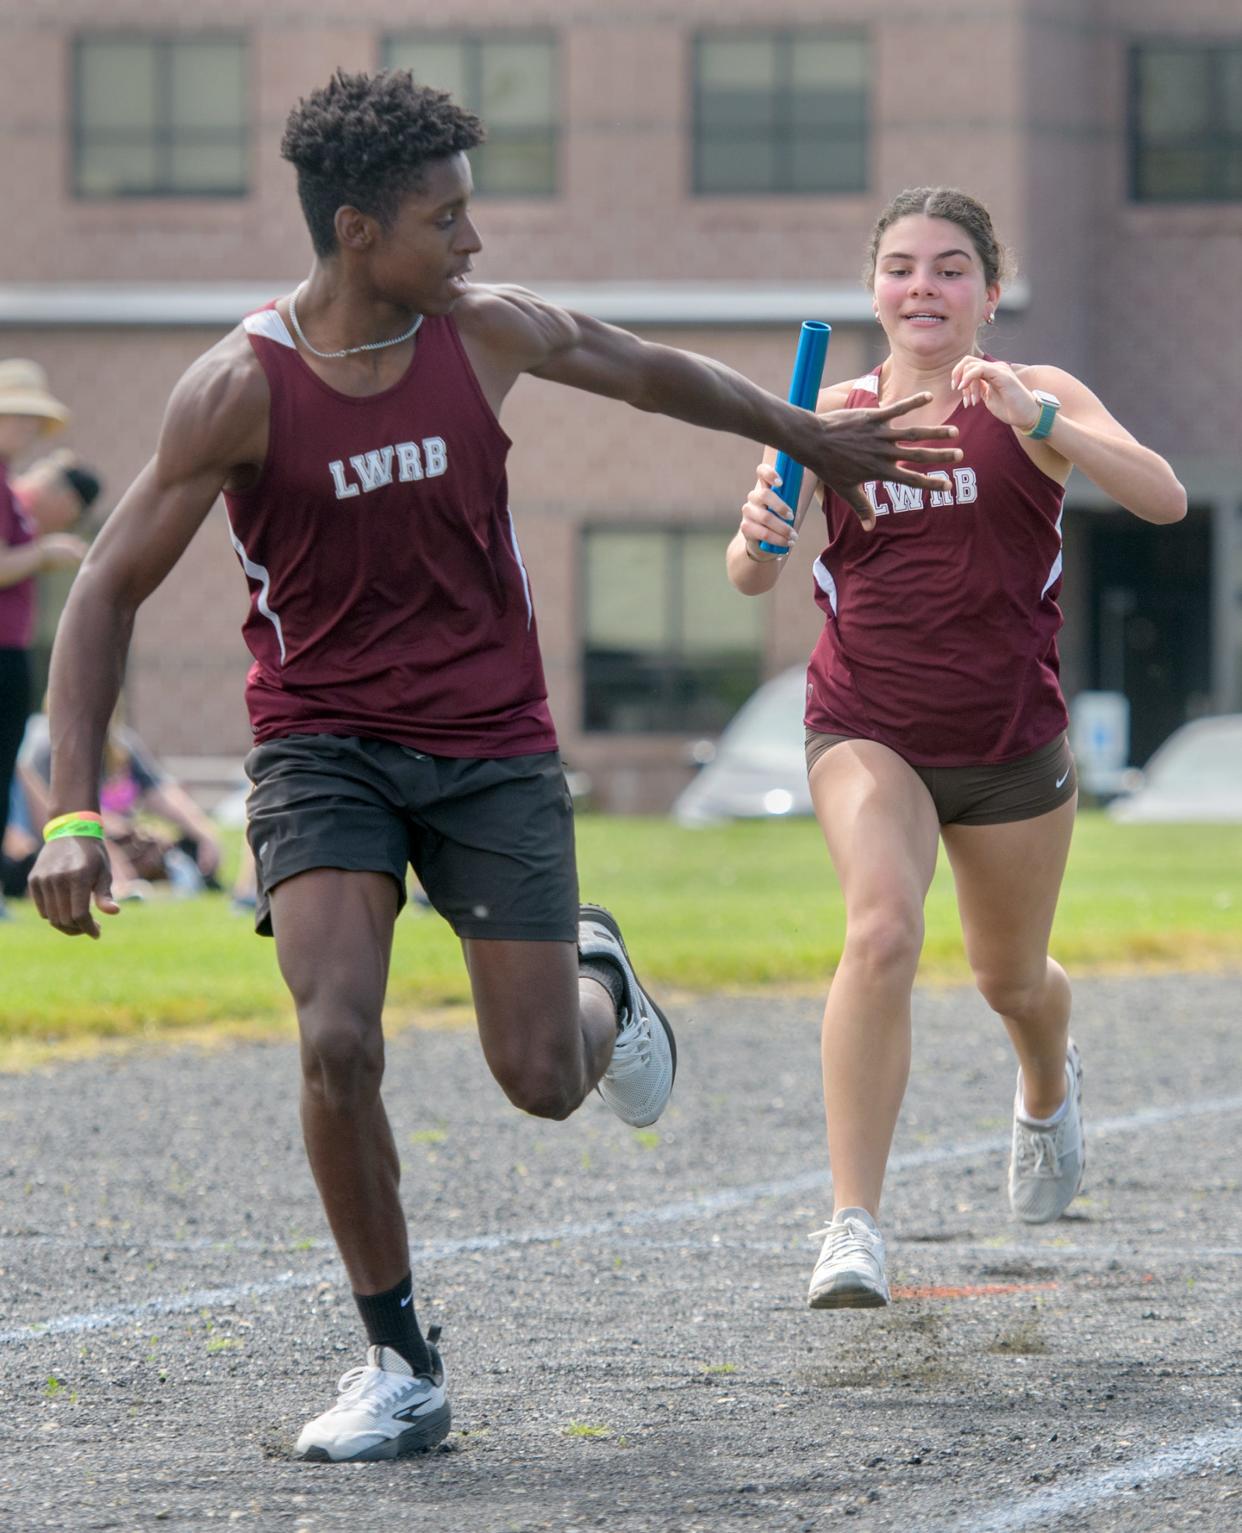 LWRB senior Lauren Crumrine, right, hands the baton off to teammate and junior Brendin Melton in the co-ed 4x100-meter relay during the first annual Cinder Classic track and field meet Saturday, May 4, 2024 in Roanoke.